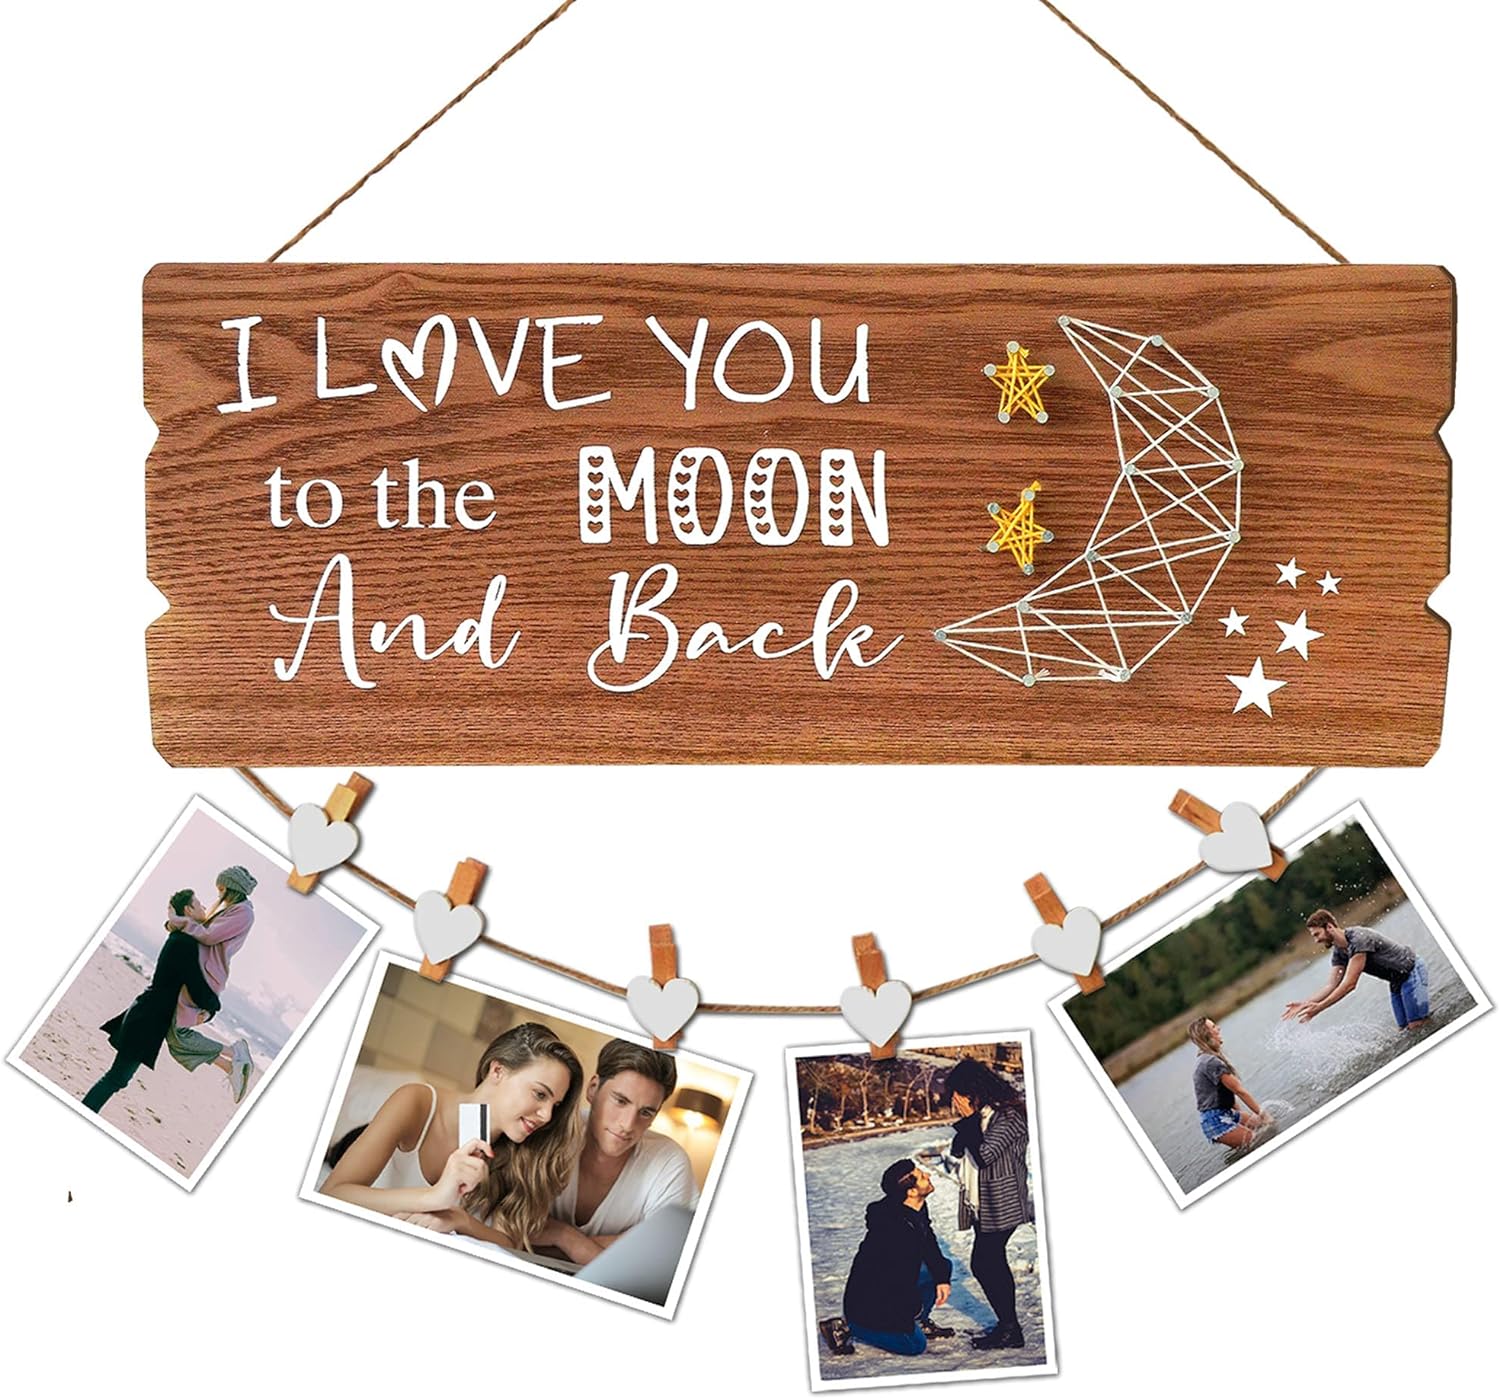 Buecasa Romantic Gifts for Girlfriend Boyfriend Couples Fiance - I Love You to The Moon and Back Photo Holder with 6 Heart Clips 15.8x6.0 Inches